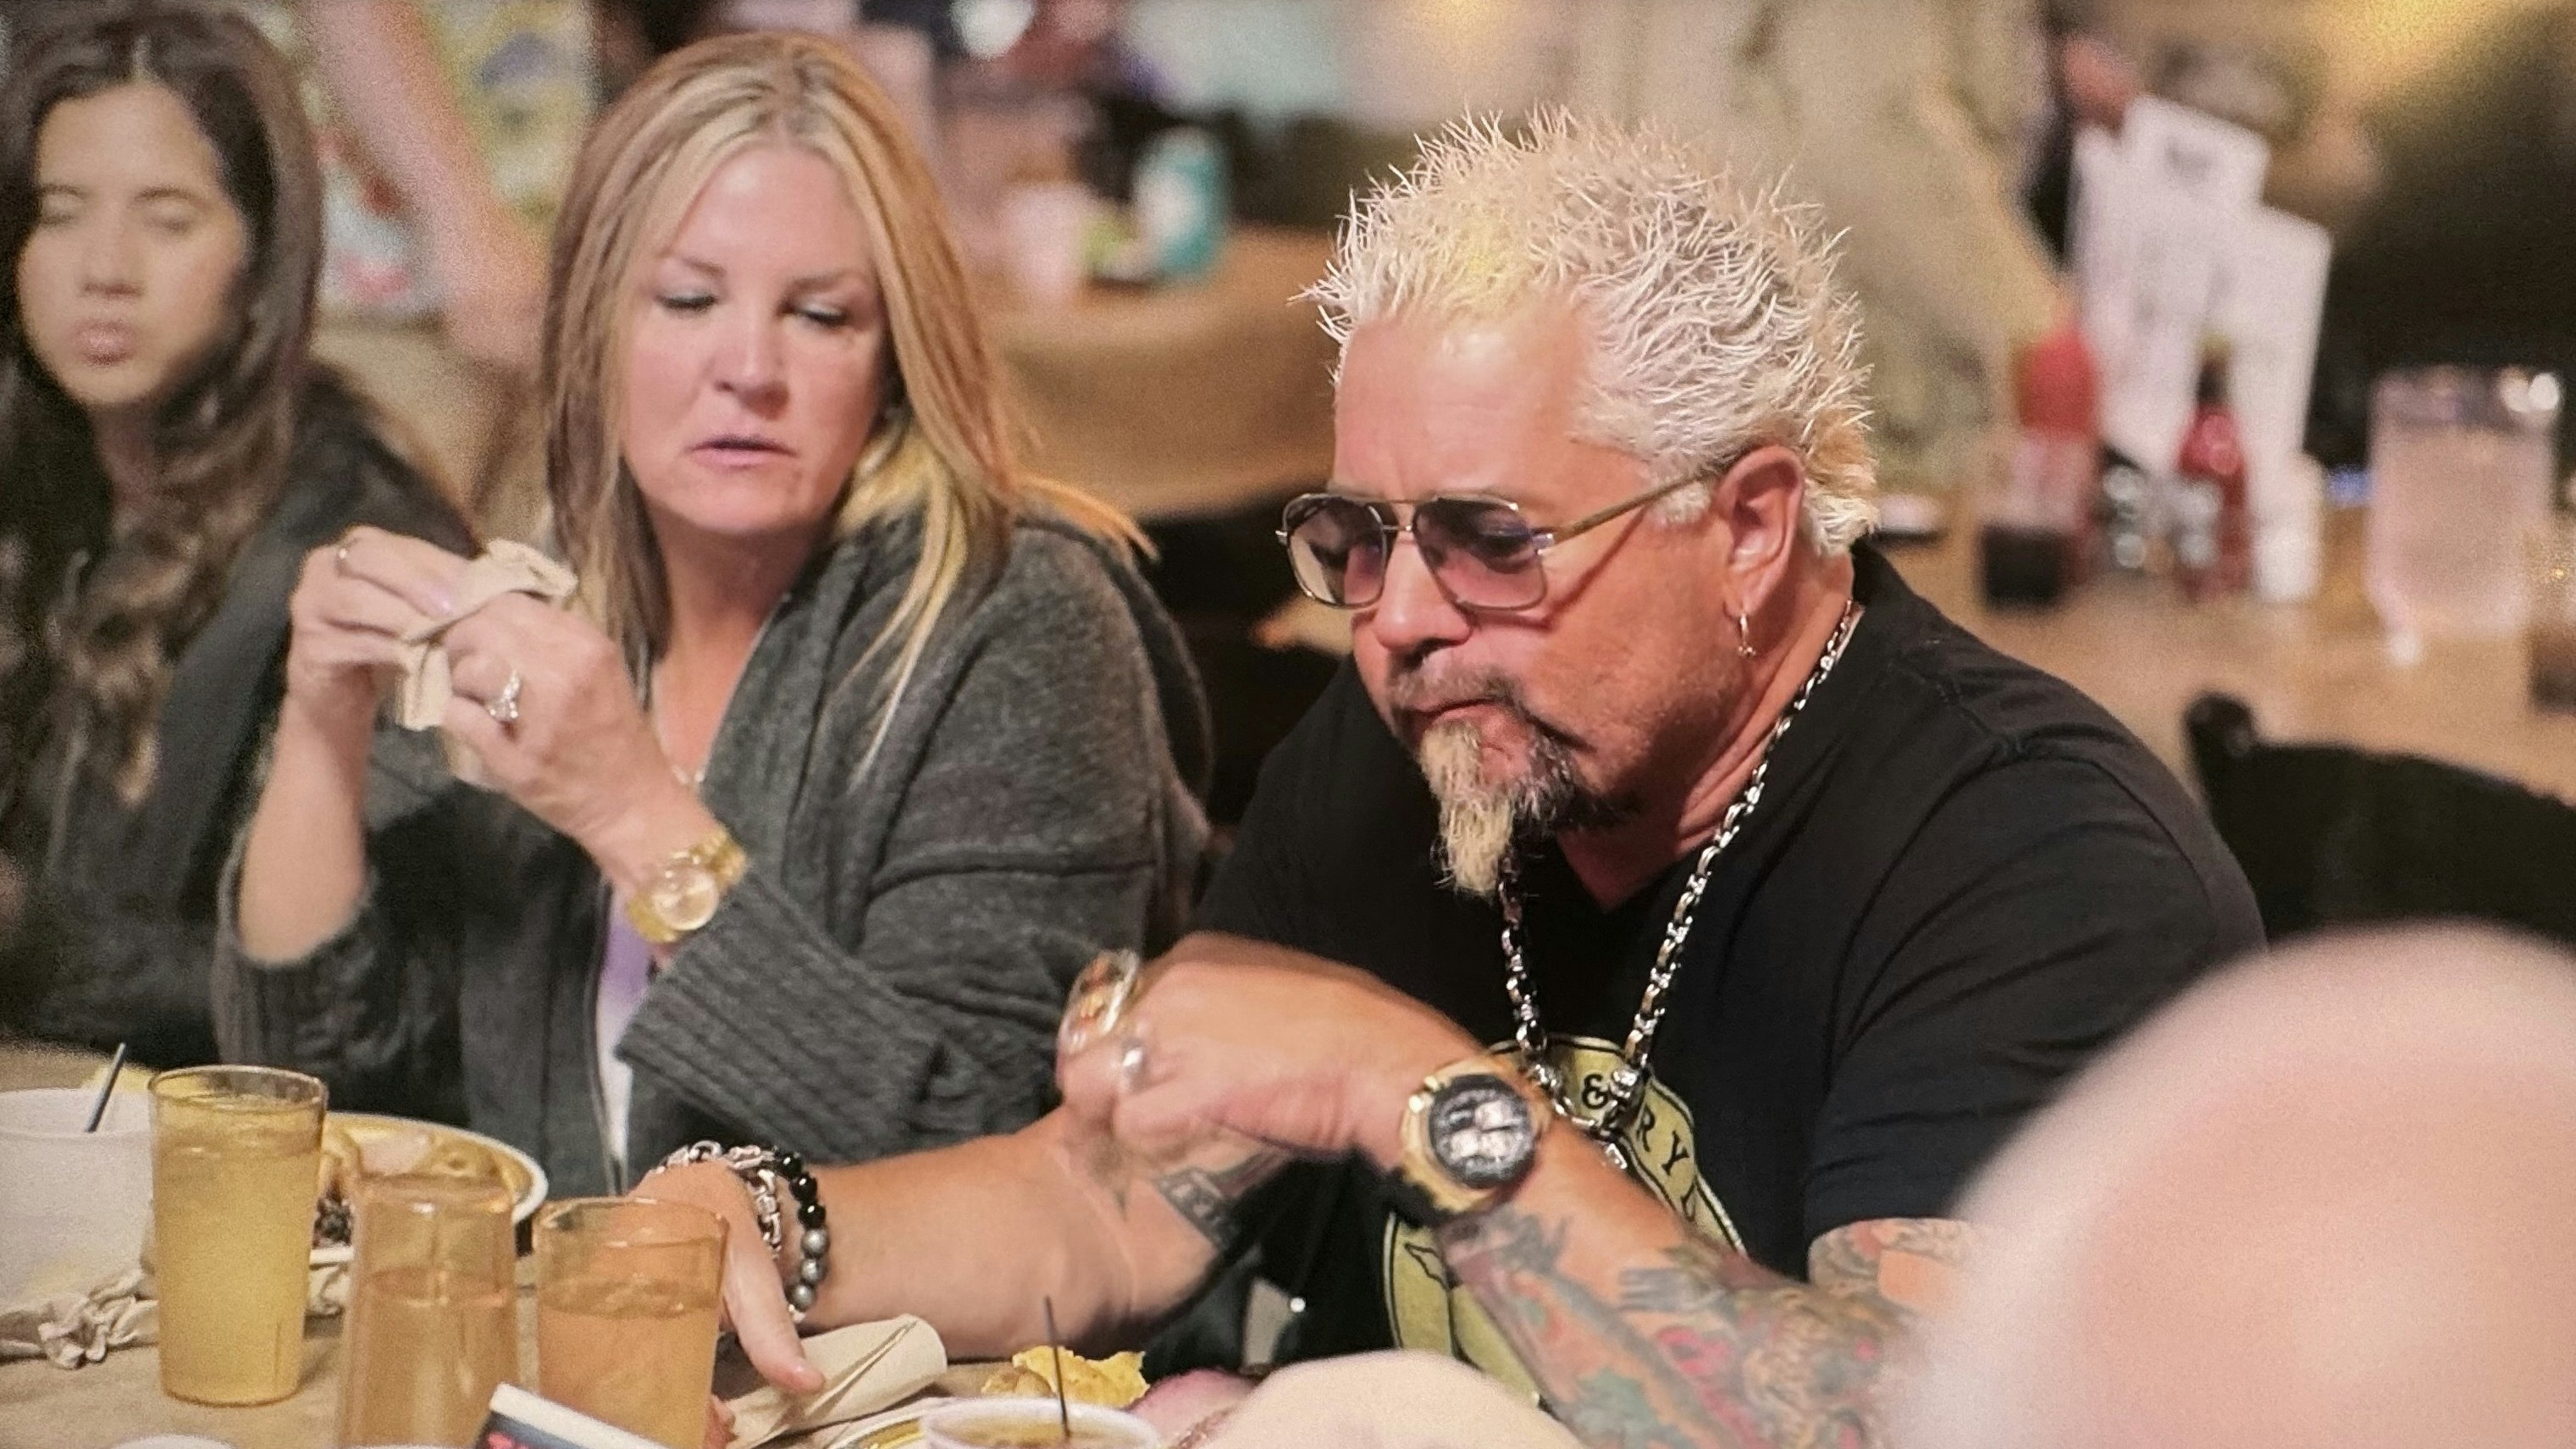 Guy Fieri enjoys a meal with hundreds of others at the Cody Cattle Company.